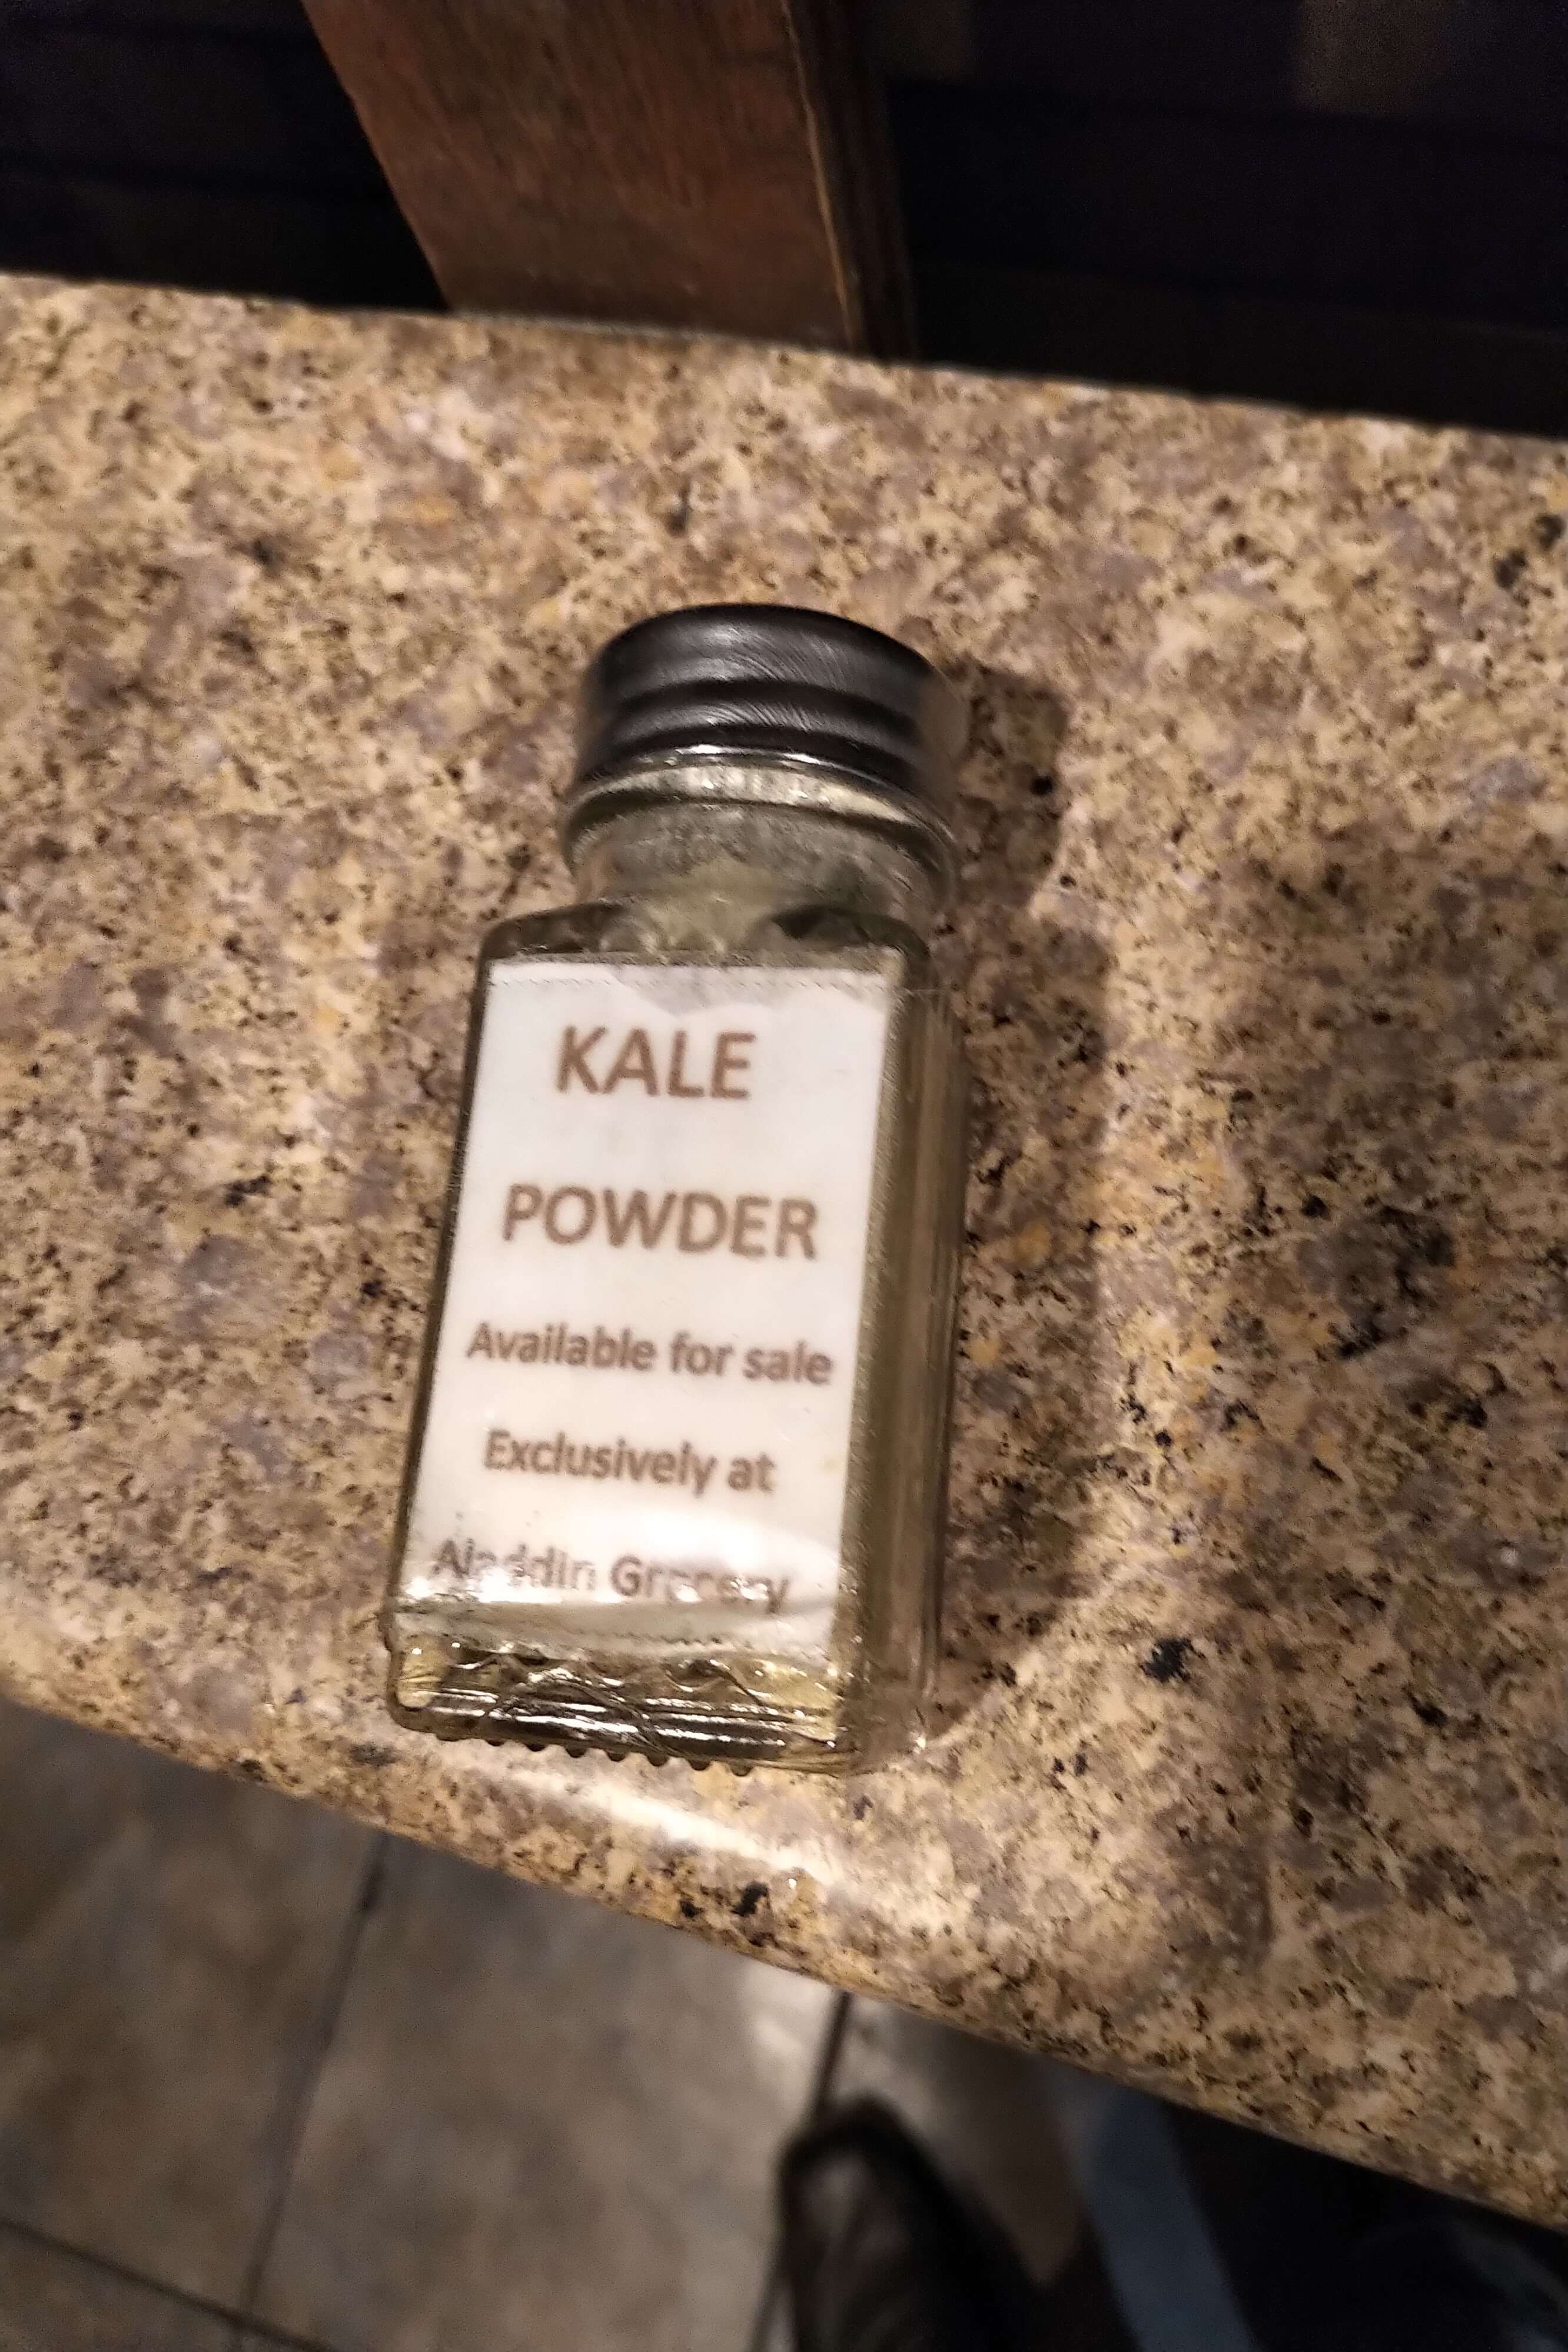 Old version of EasyKale kale shaker, resembling a glass salt shaker, with its name written on a paper label stuck to the container, displayed on a kitchen countertop.